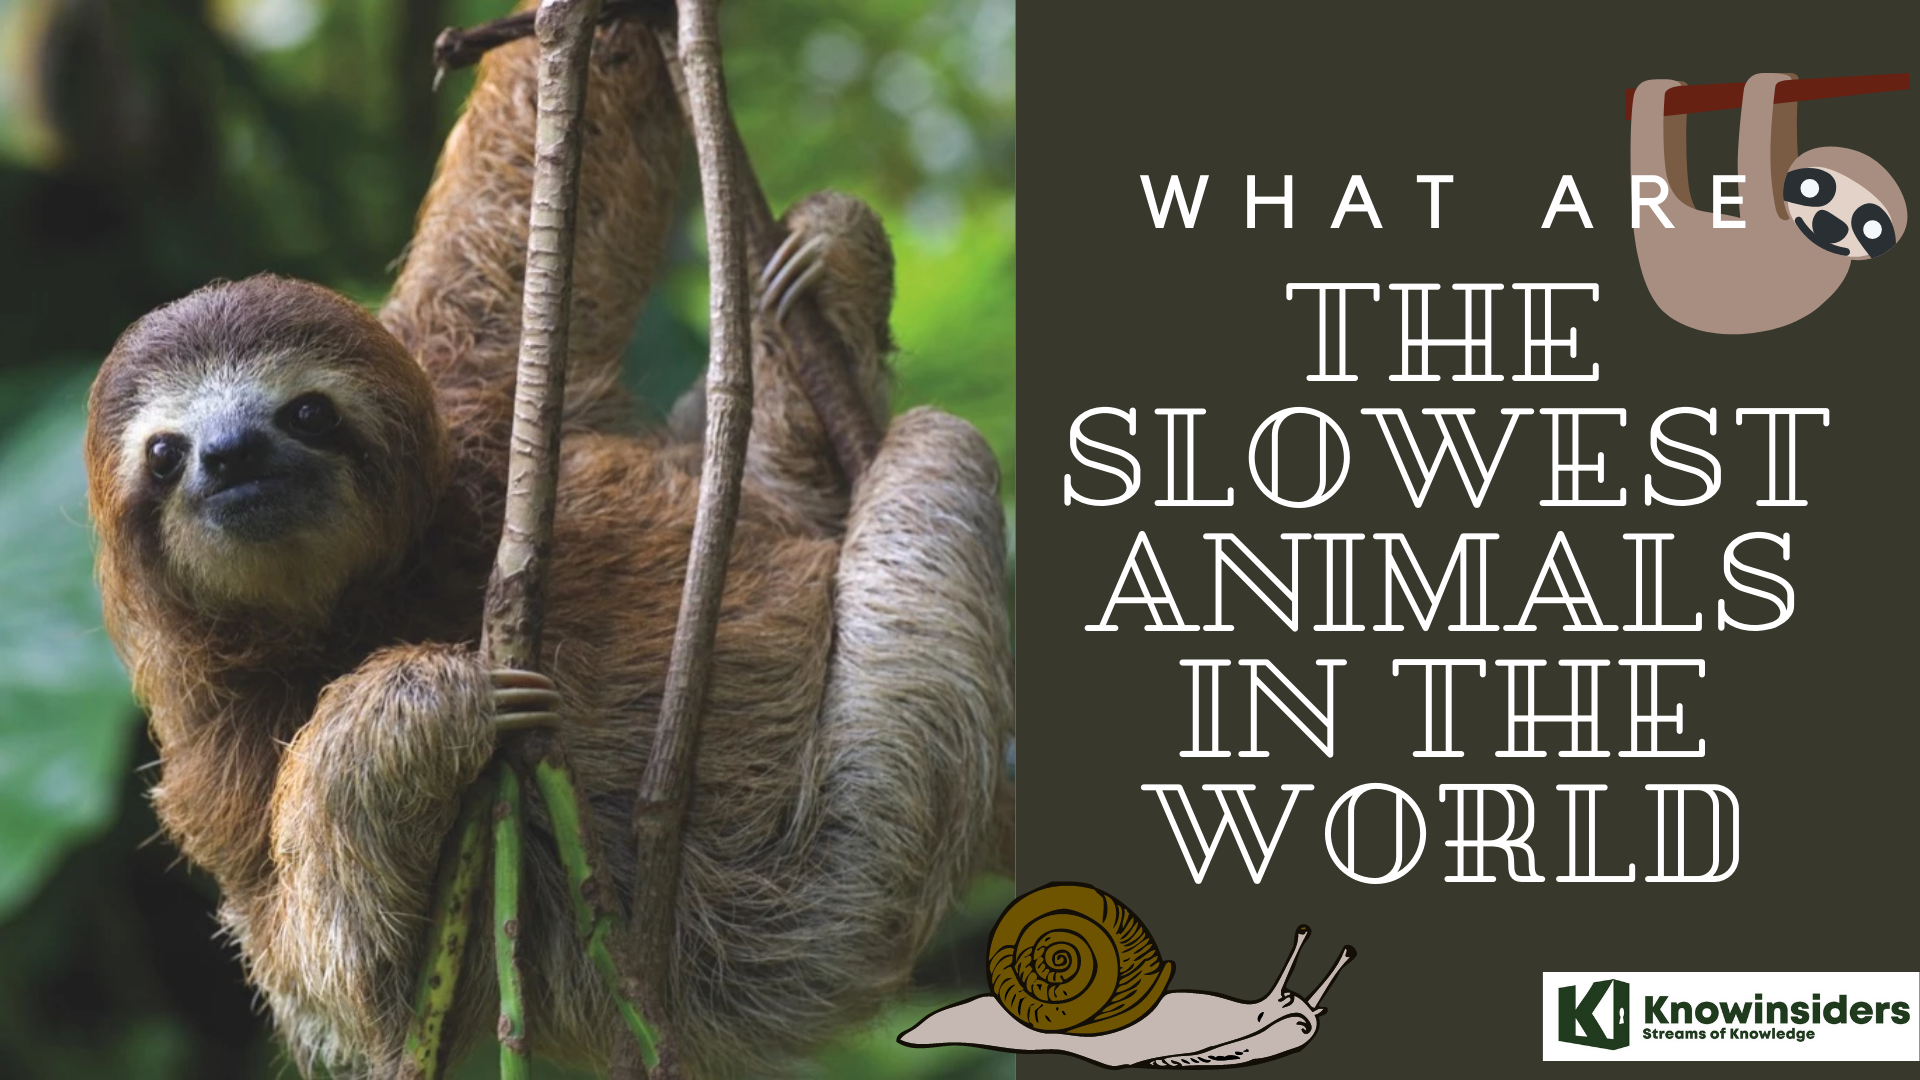 Amazing Facts About The Slowest Animals In The World | KnowInsiders